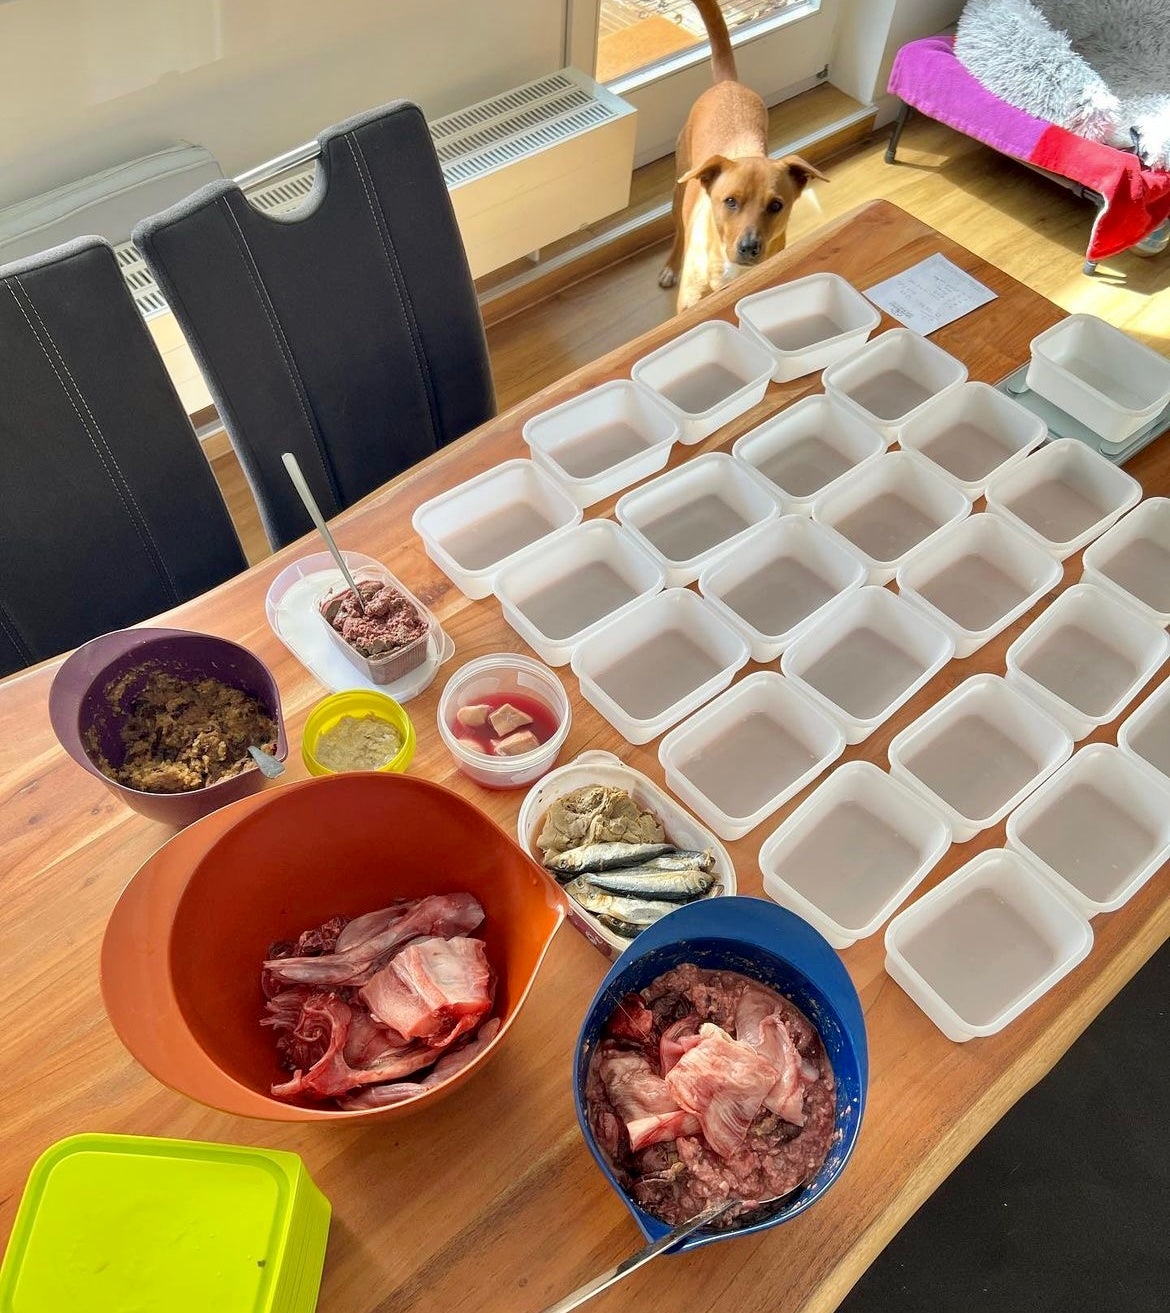 DIY raw dog food is not limited to a kitchen space - any large table works too